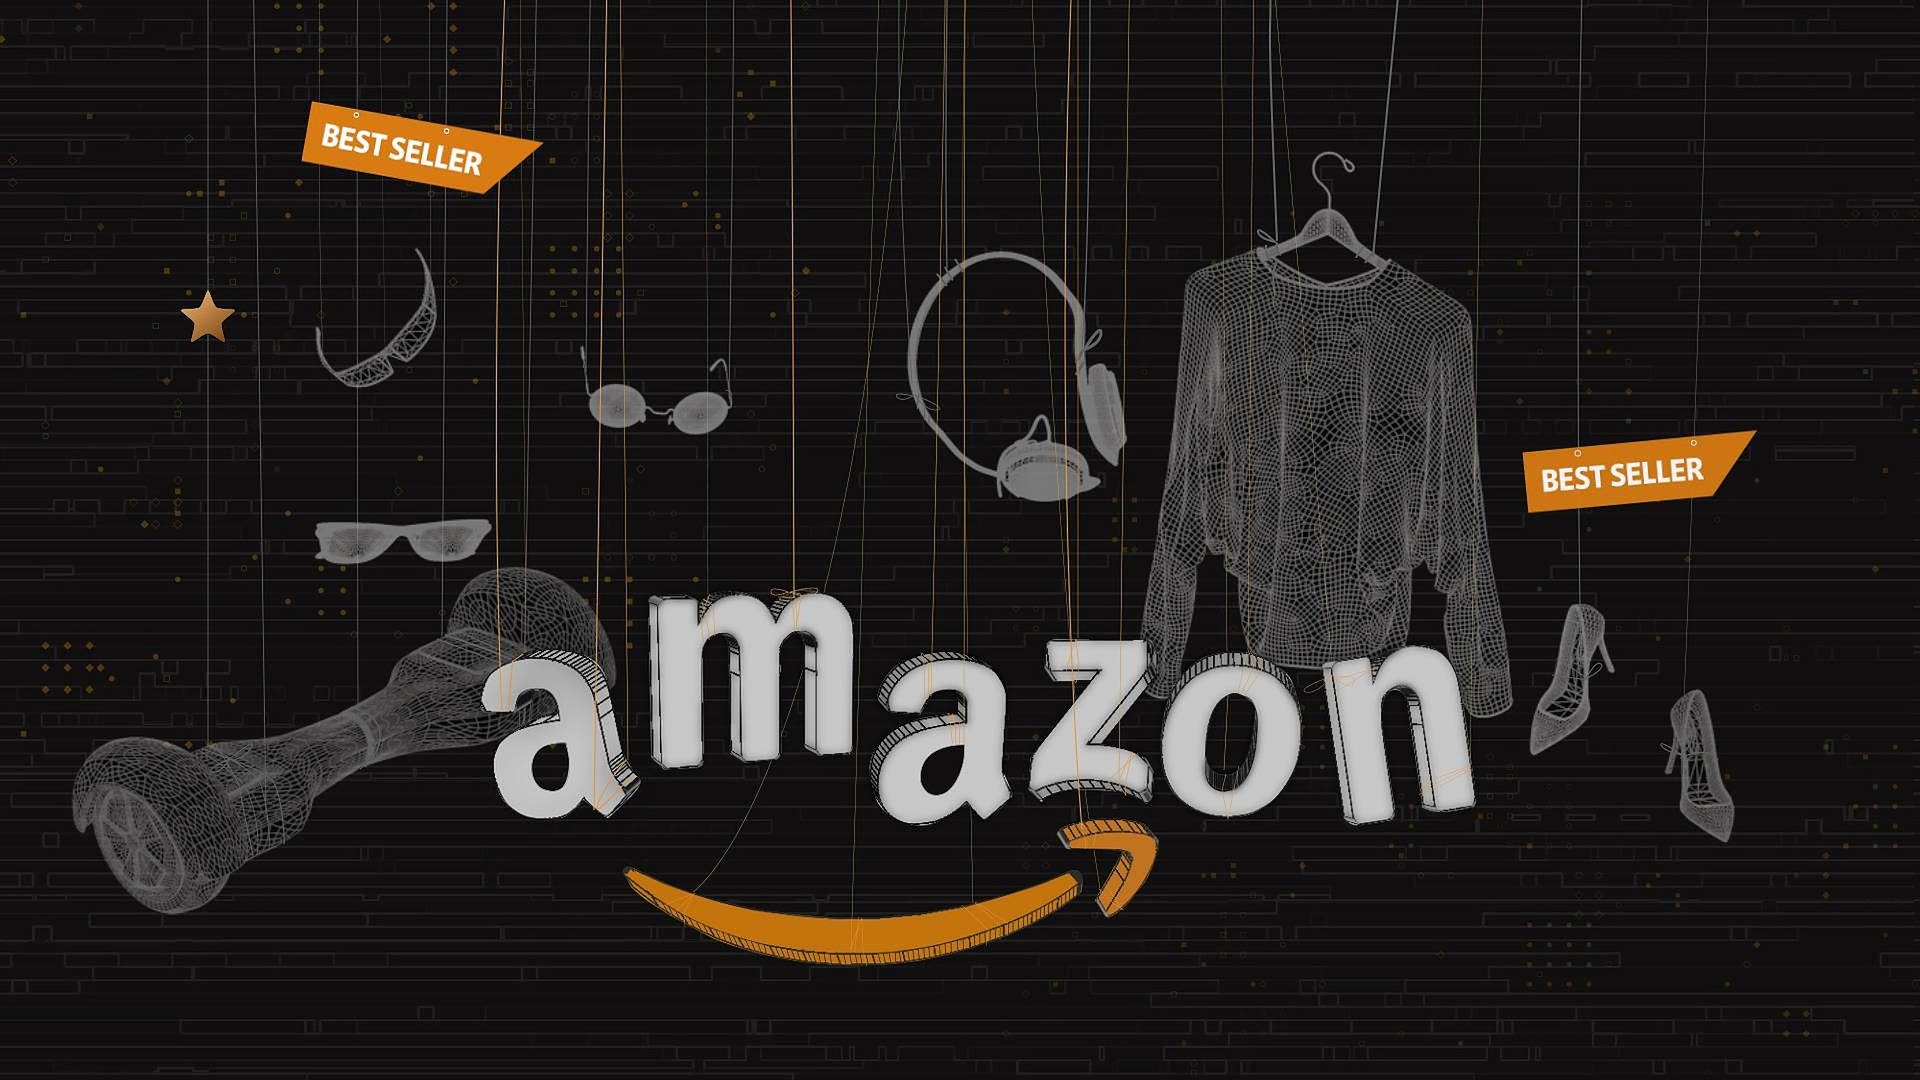 Free Amazon Wallpaper Downloads, [100+] Amazon Wallpapers for FREE |  